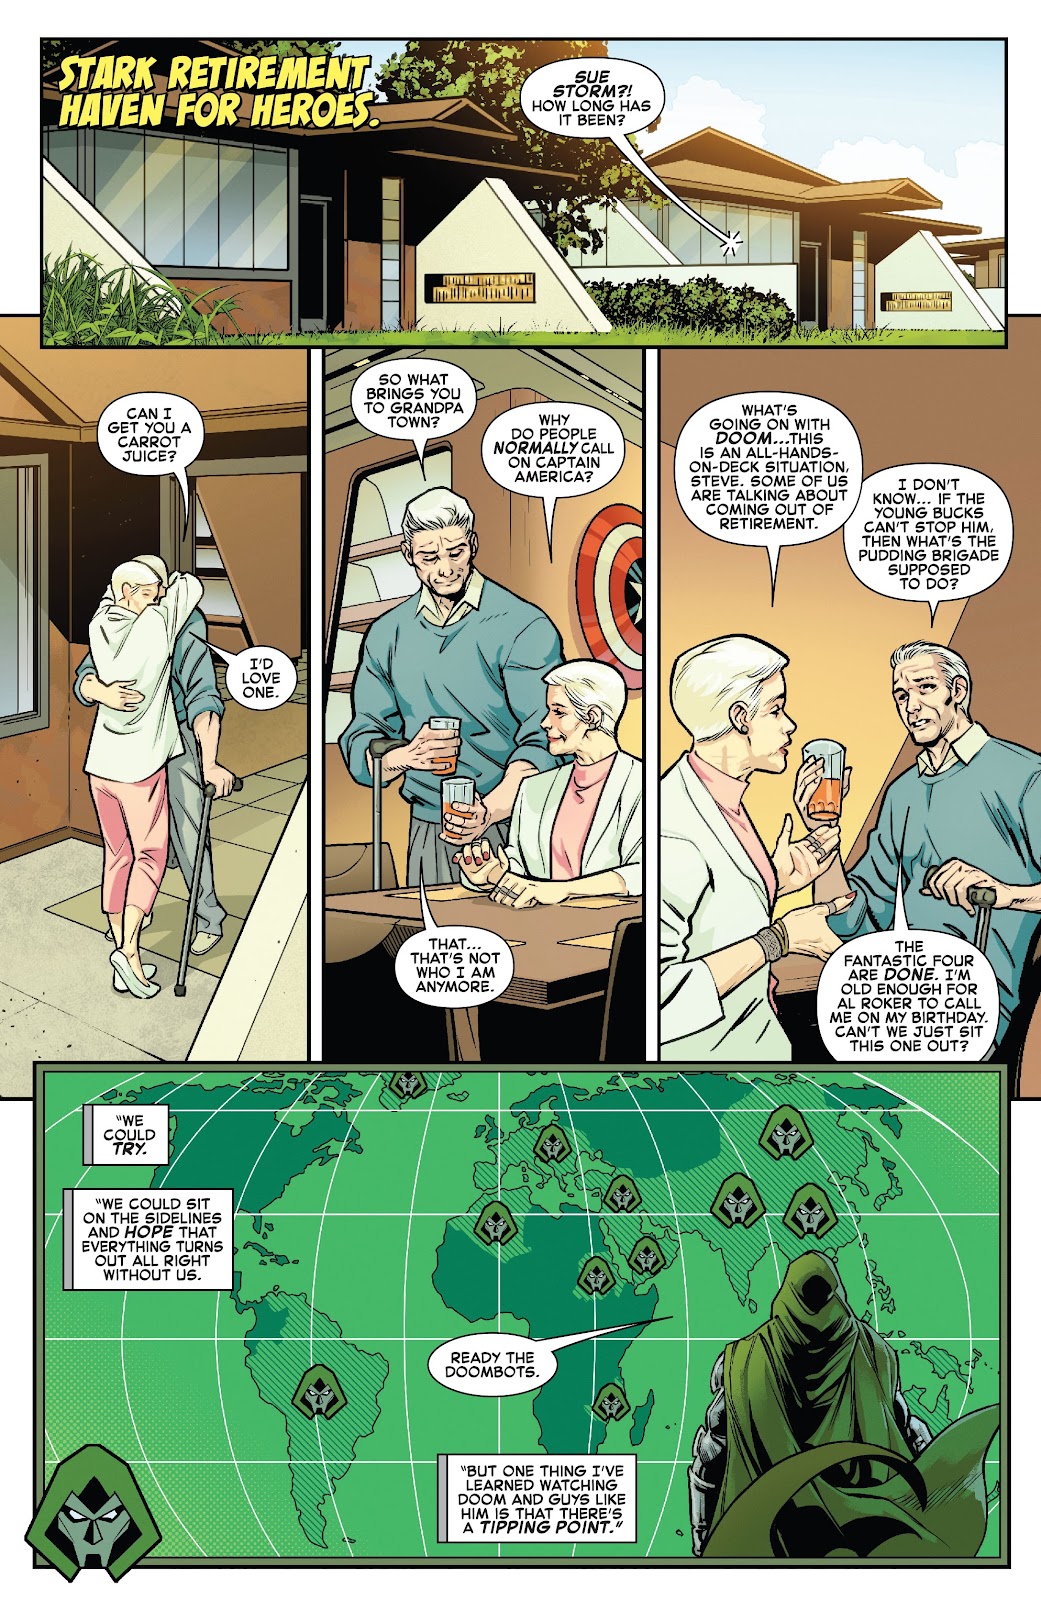 Fantastic Four: Life Story issue 6 - Page 9